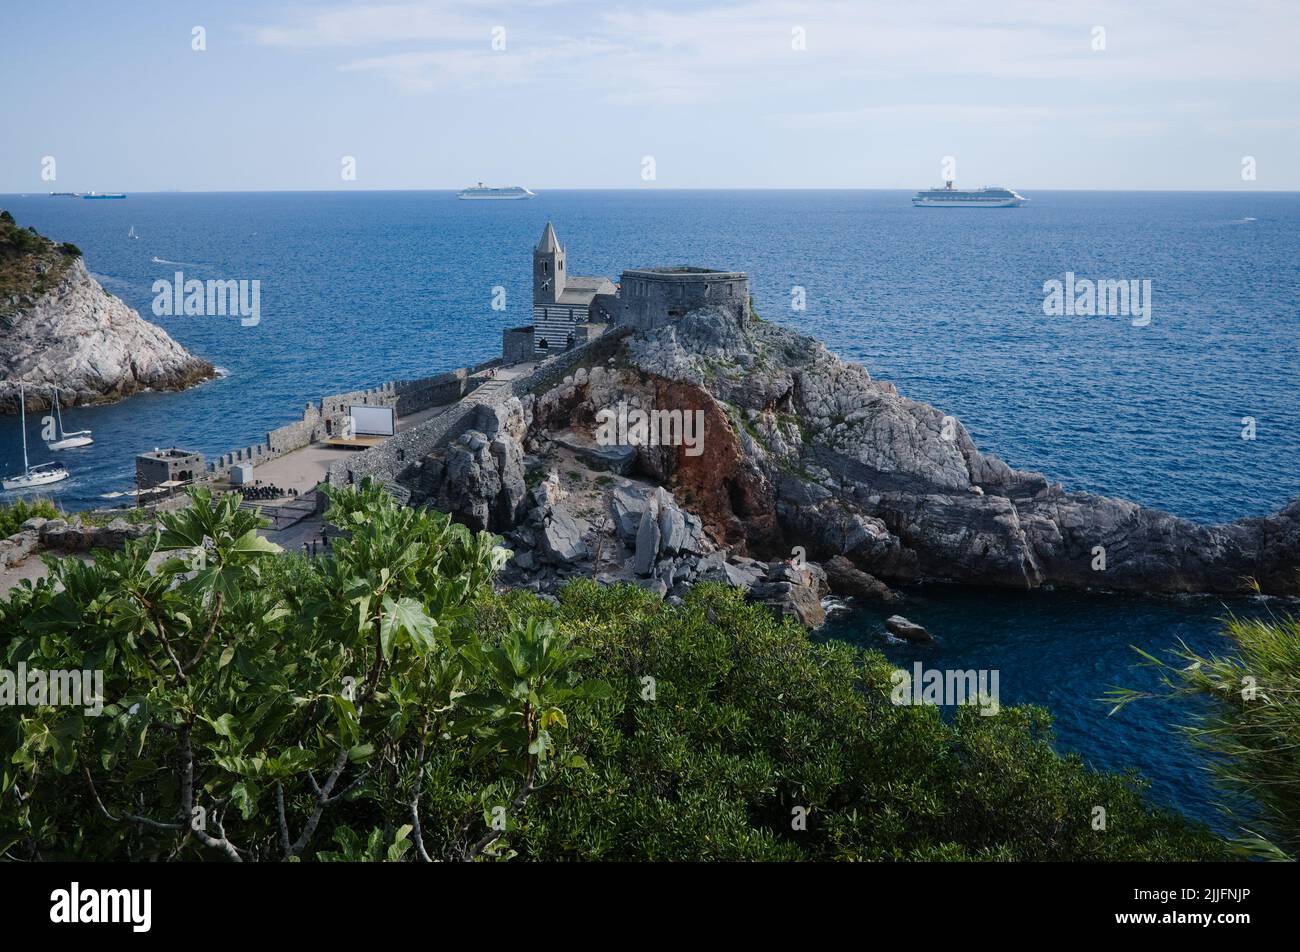 View of Chiesa San Pietro or St. Peter Church in Porto Venere, Liguria, Italy. View of medieval church on rock by sea. Cruise ships are on horizon Stock Photo